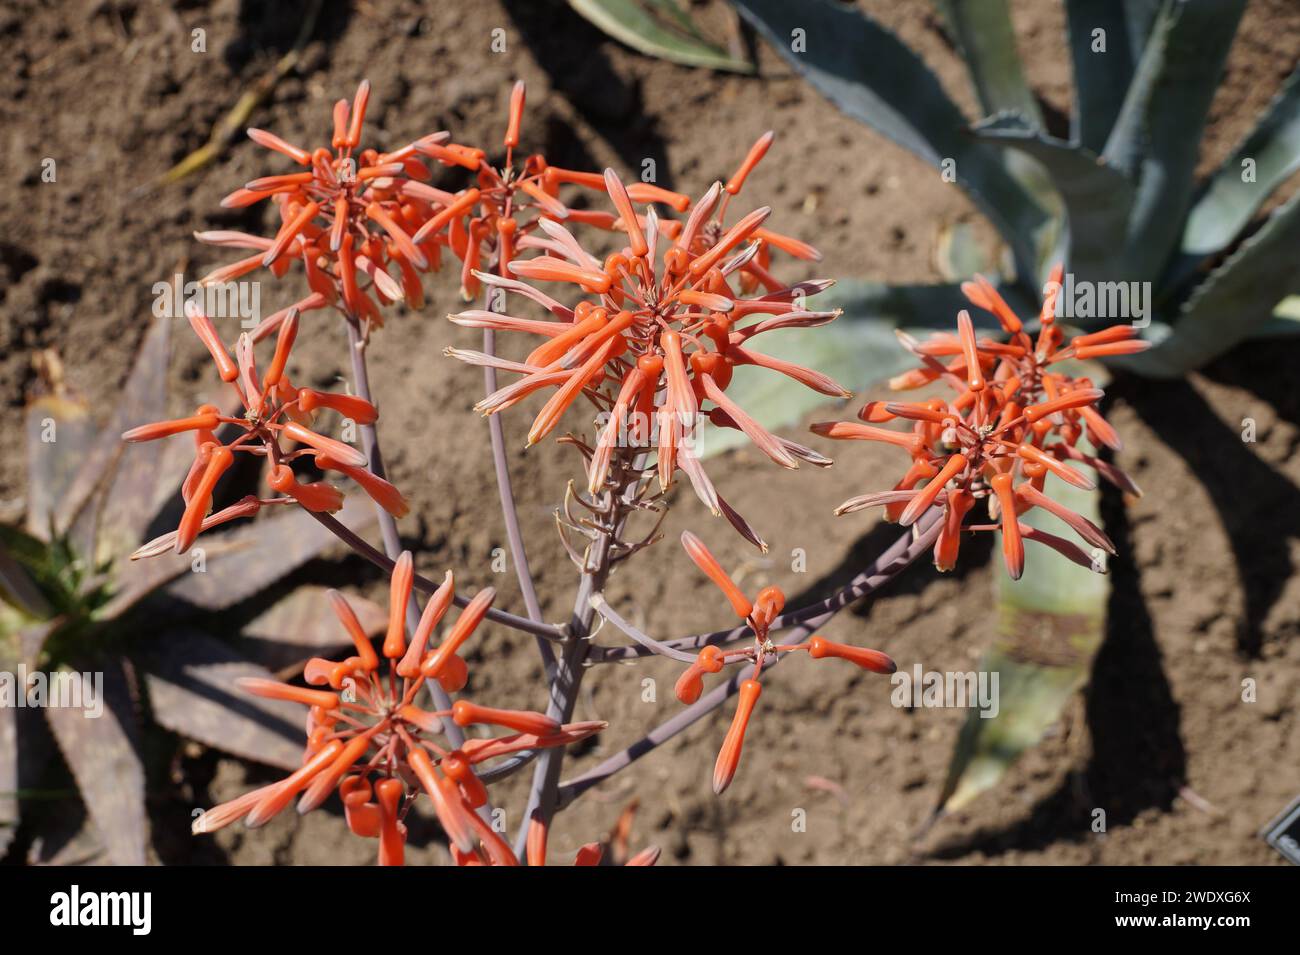 Blooming aloe maculata in an ornamental garden close-up Stock Photo